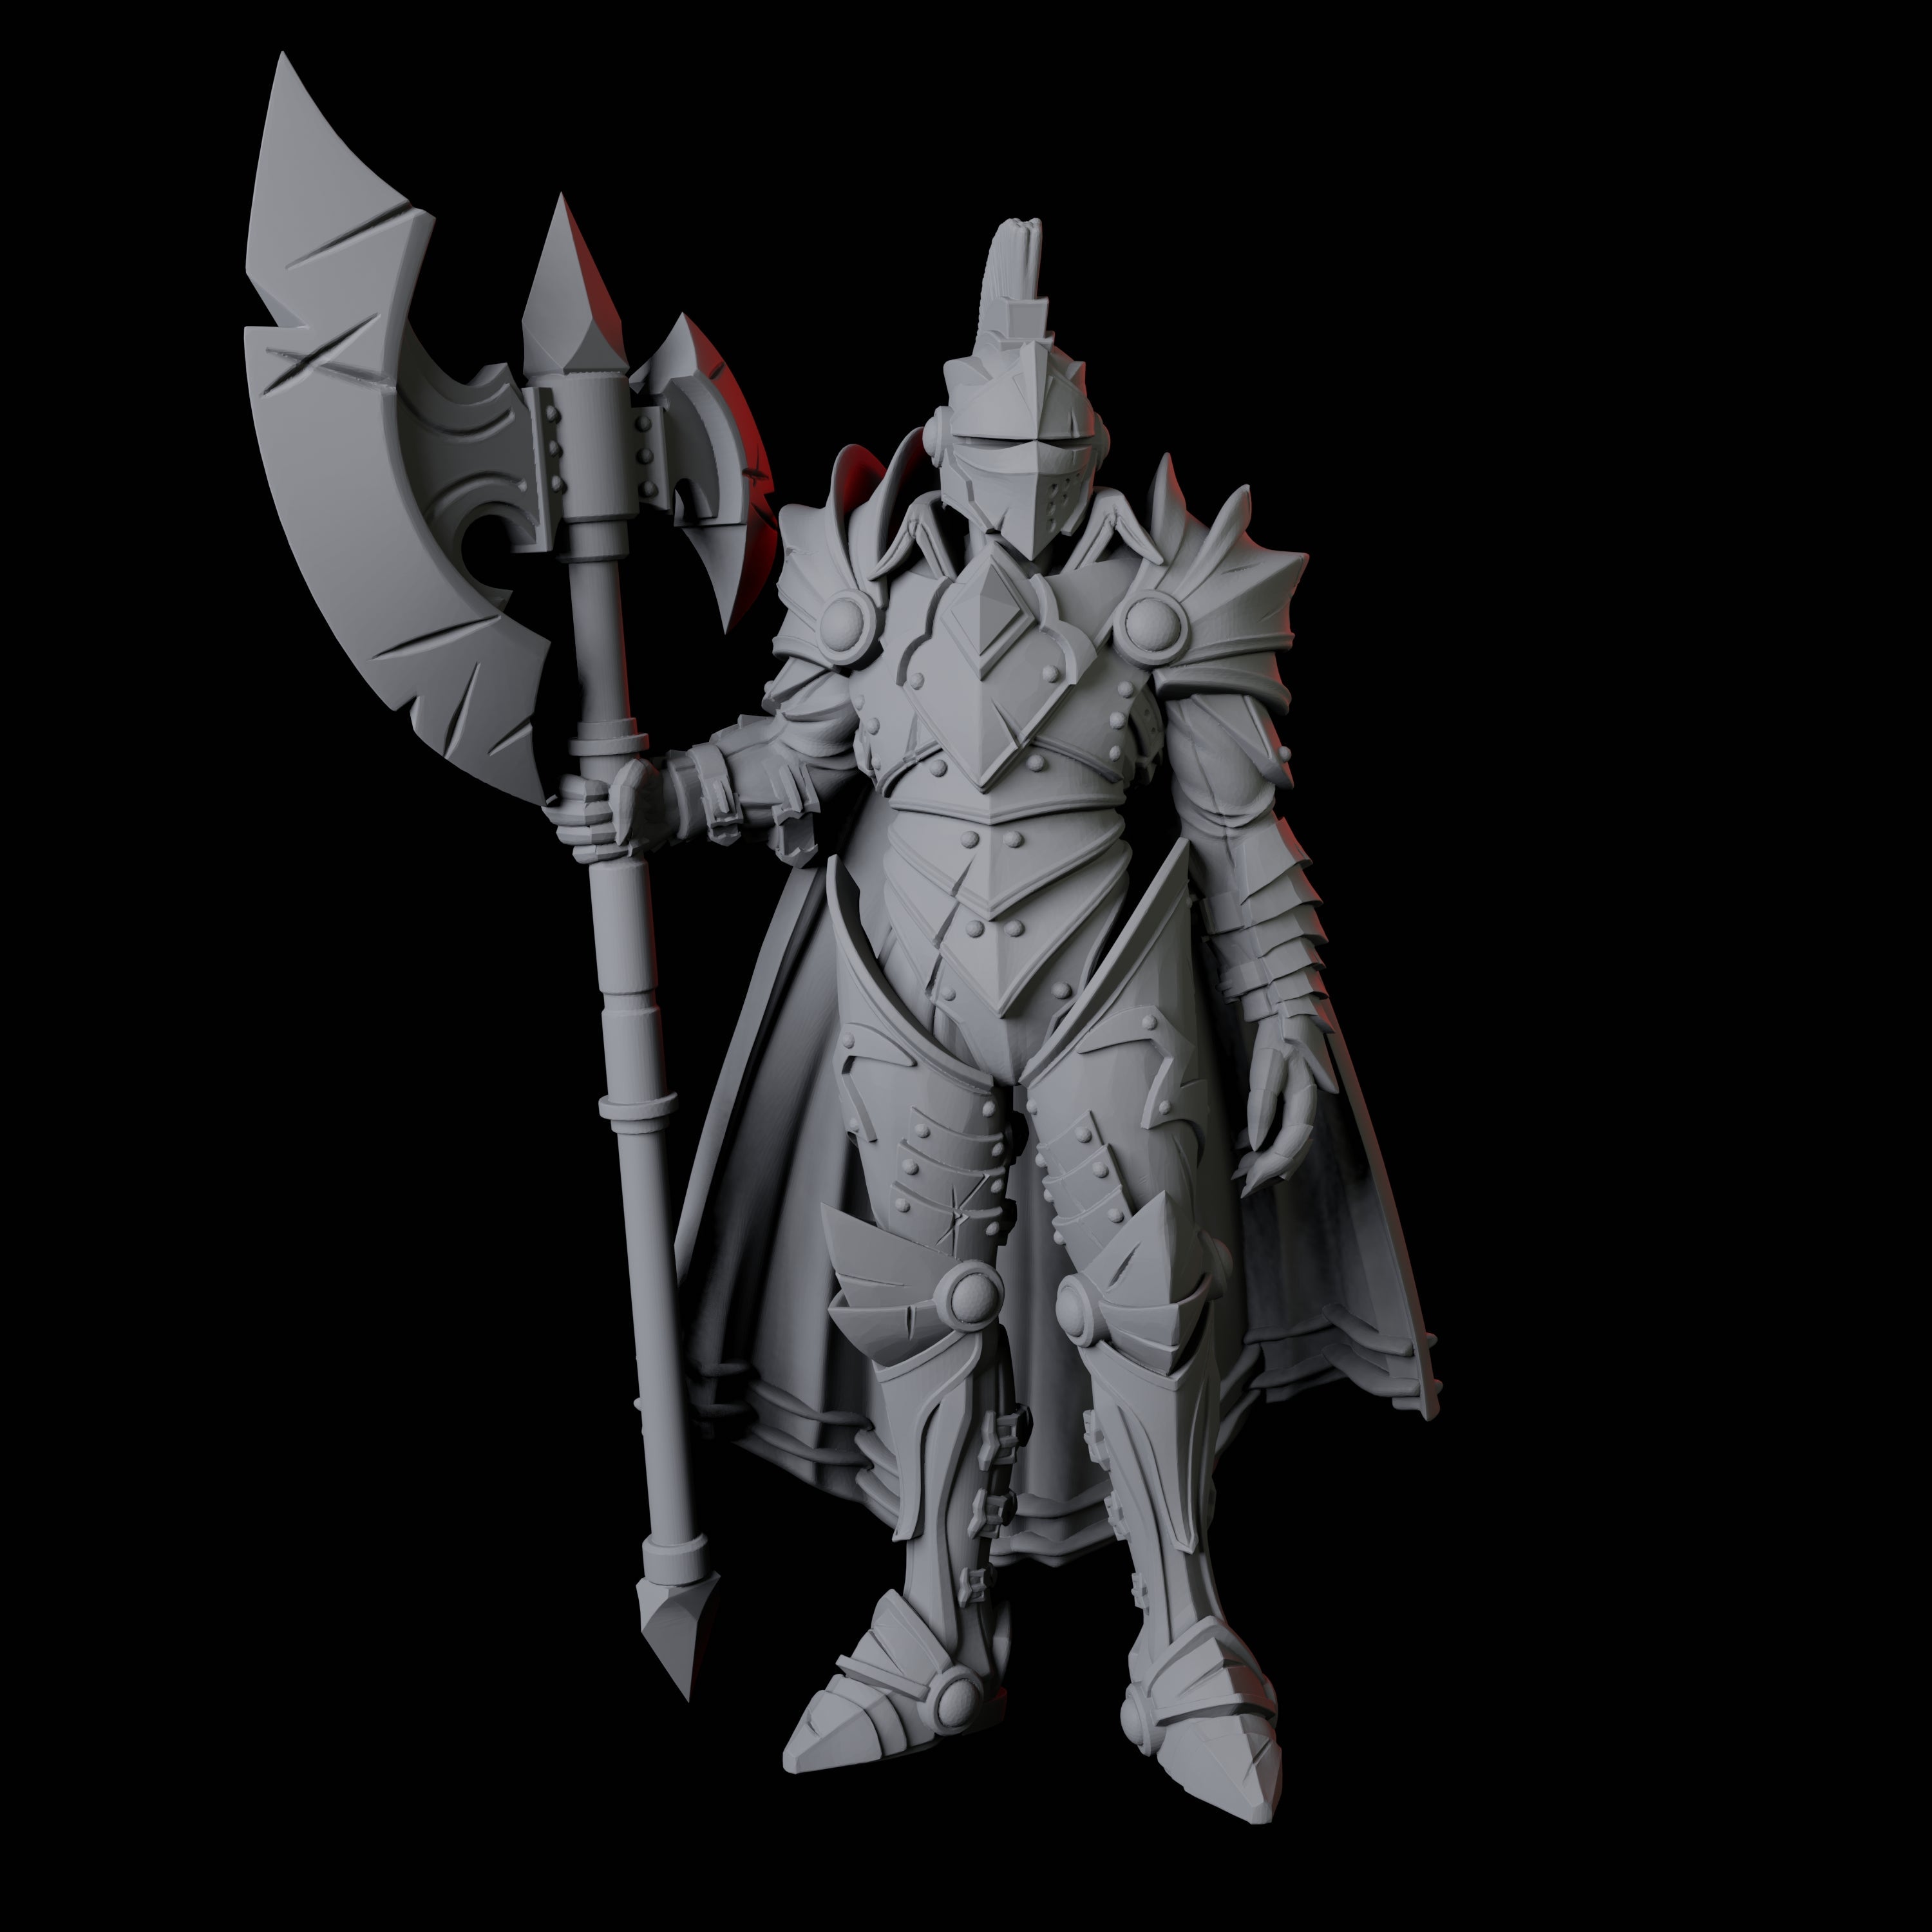 Three Axe-Wielding Knights Miniature for Dungeons and Dragons, Pathfinder or other TTRPGs